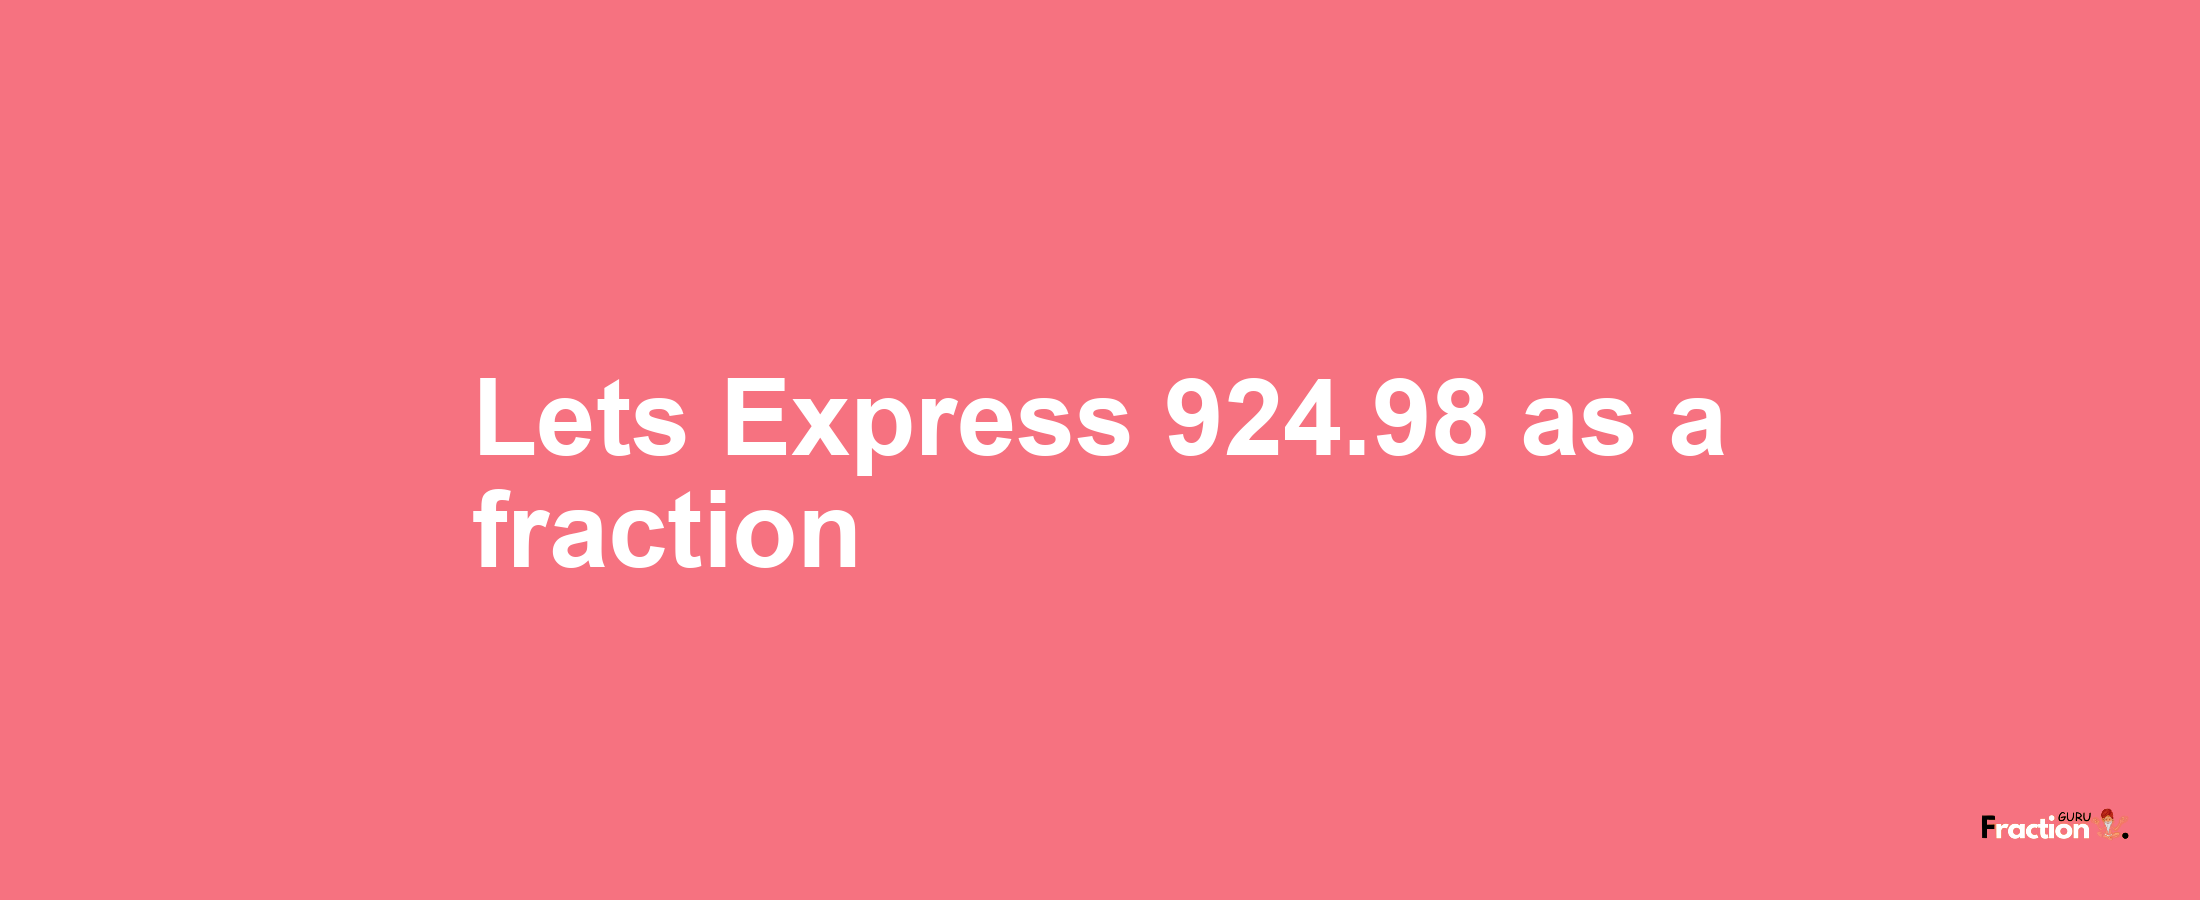 Lets Express 924.98 as afraction